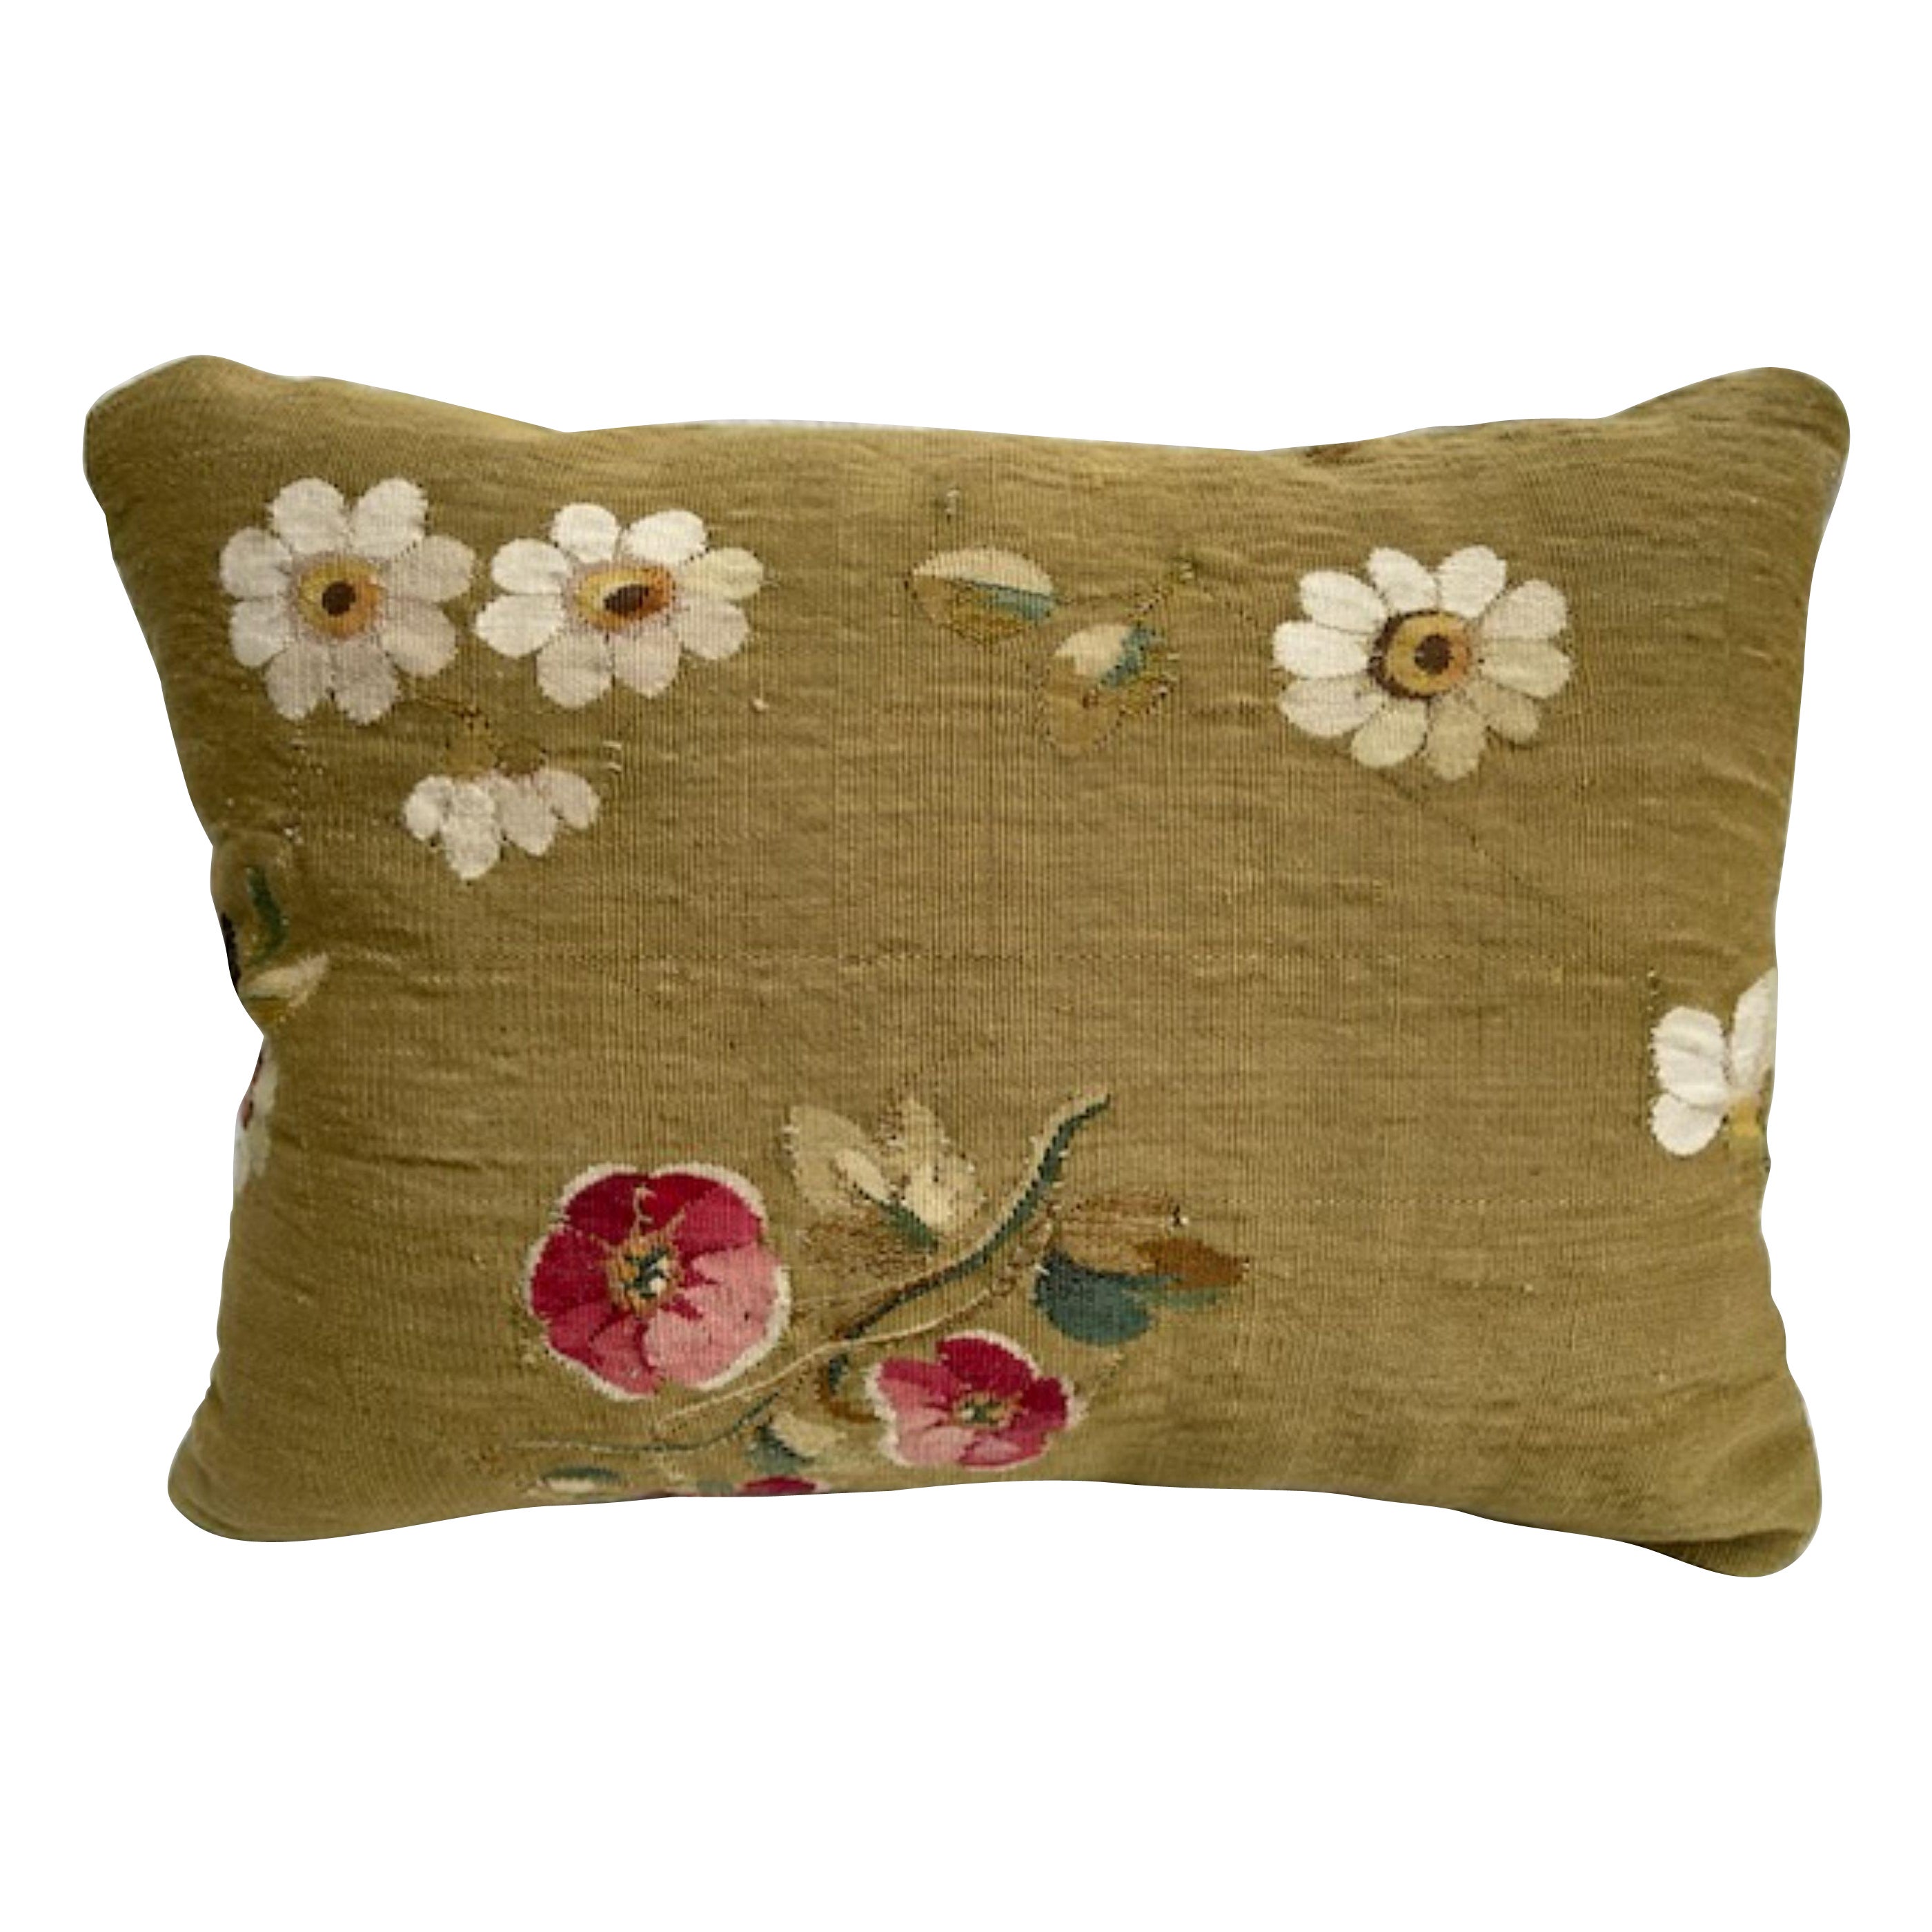 Mid 18th Century French Aubusson Tapestry Pillow For Sale